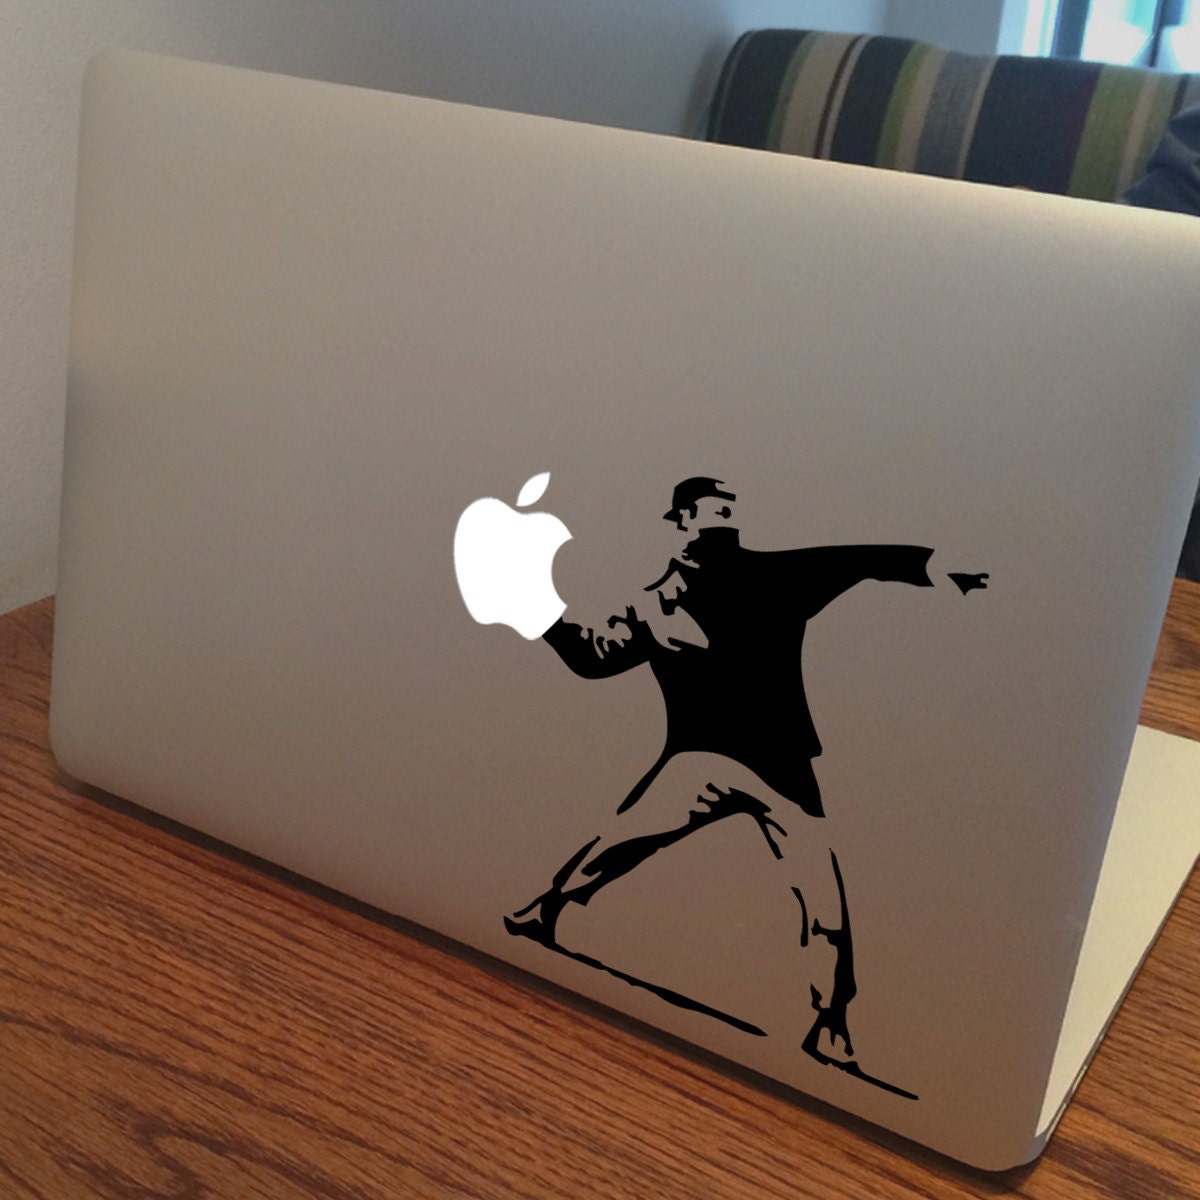 Laptop Stickers  MacBook Decals That Last! - [Ships Fast]